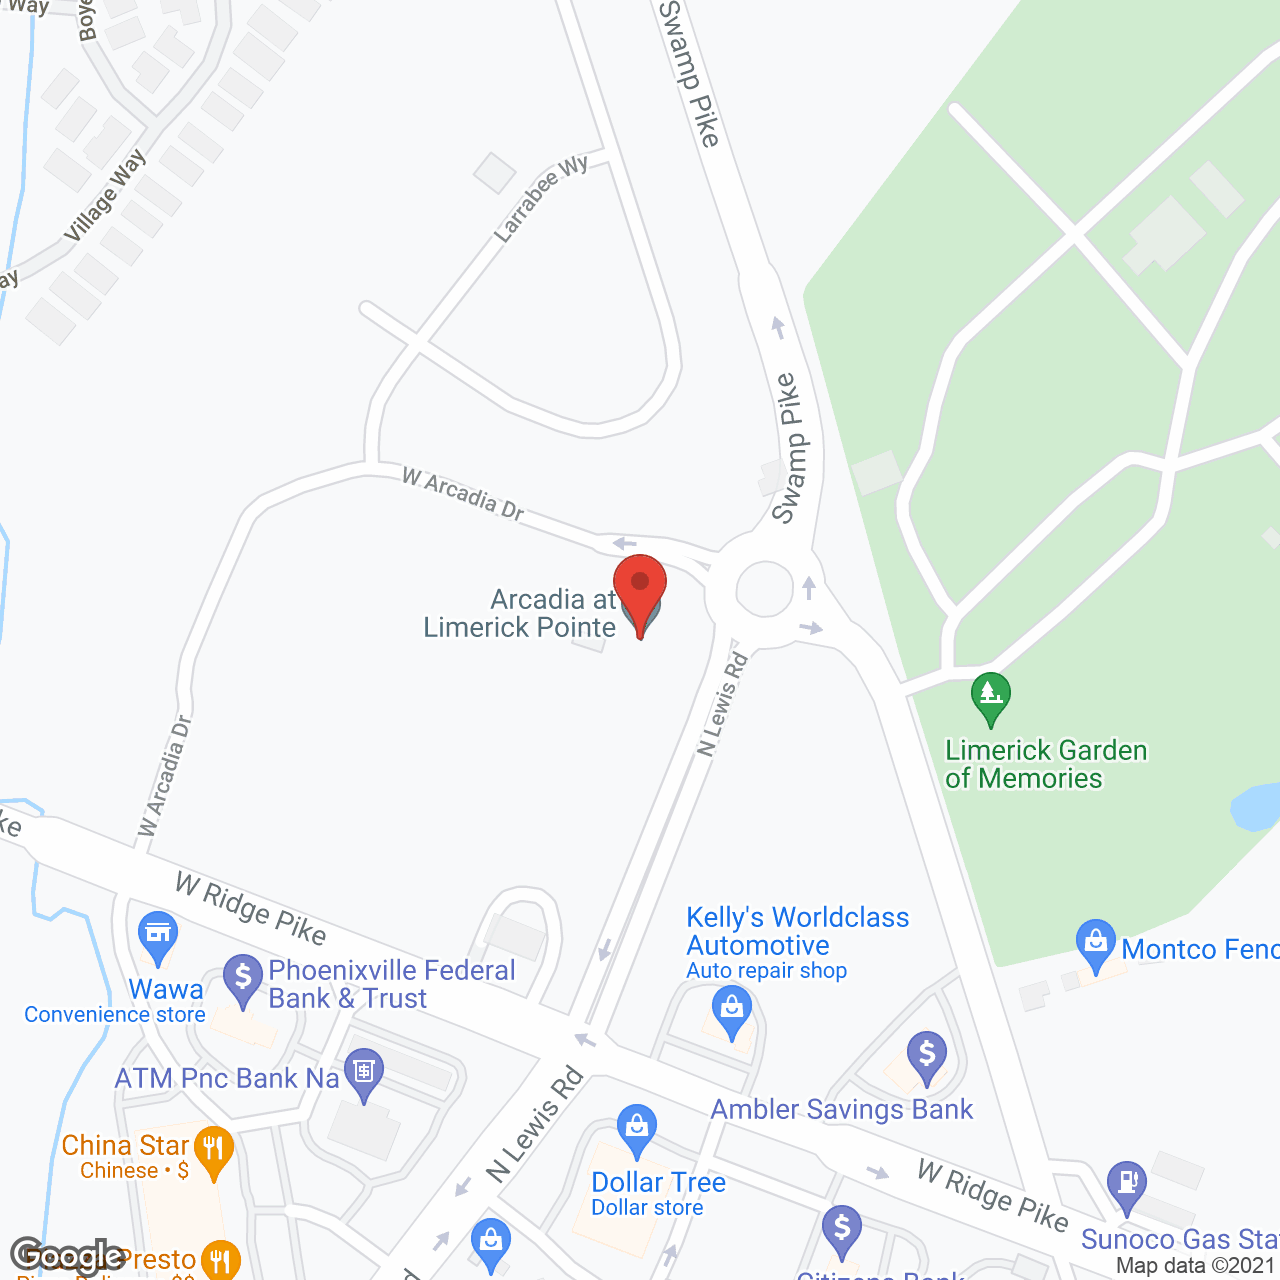 Arcadia at Limerick Pointe in google map